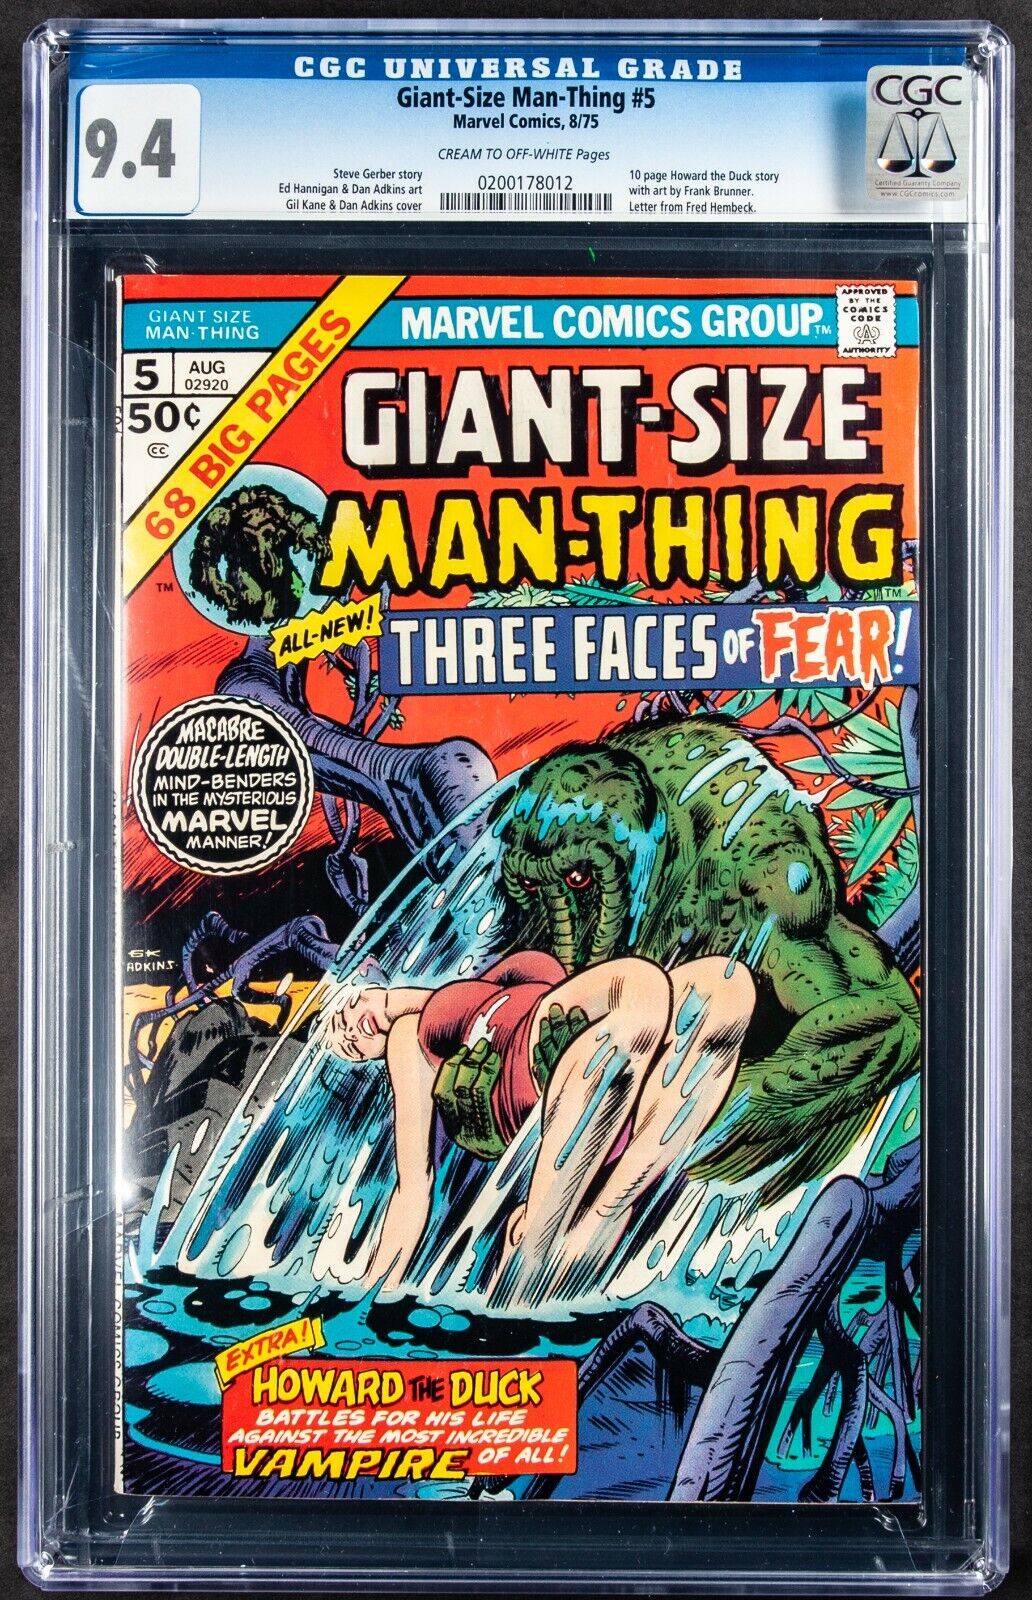 Giant Size Man-Thing #5 (Marvel, 1975) CGC NM 9.4 Cream to Off-White Pages